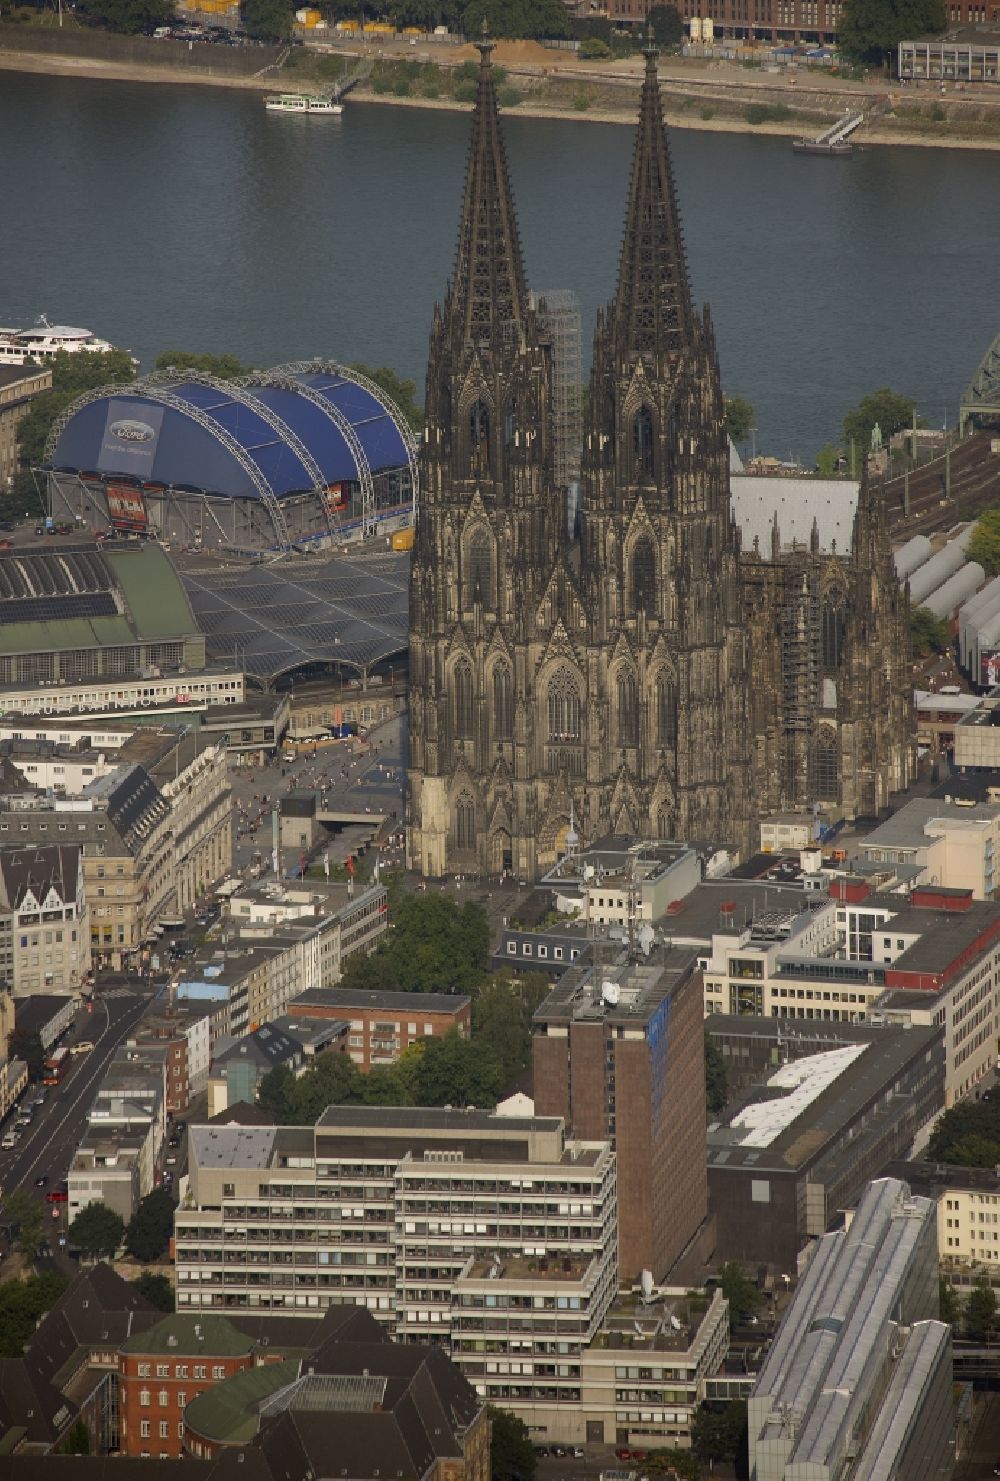 Köln from the bird's eye view: View of the Cologne Cathedral in the center of Cologne, near central station. The Cologne Cathedral is a Roman Catholic church in the Gothic style in Cologne and the Cathedral of the Archdiocese of Cologne. It is the second highest church building in Europe and the third highest in the world